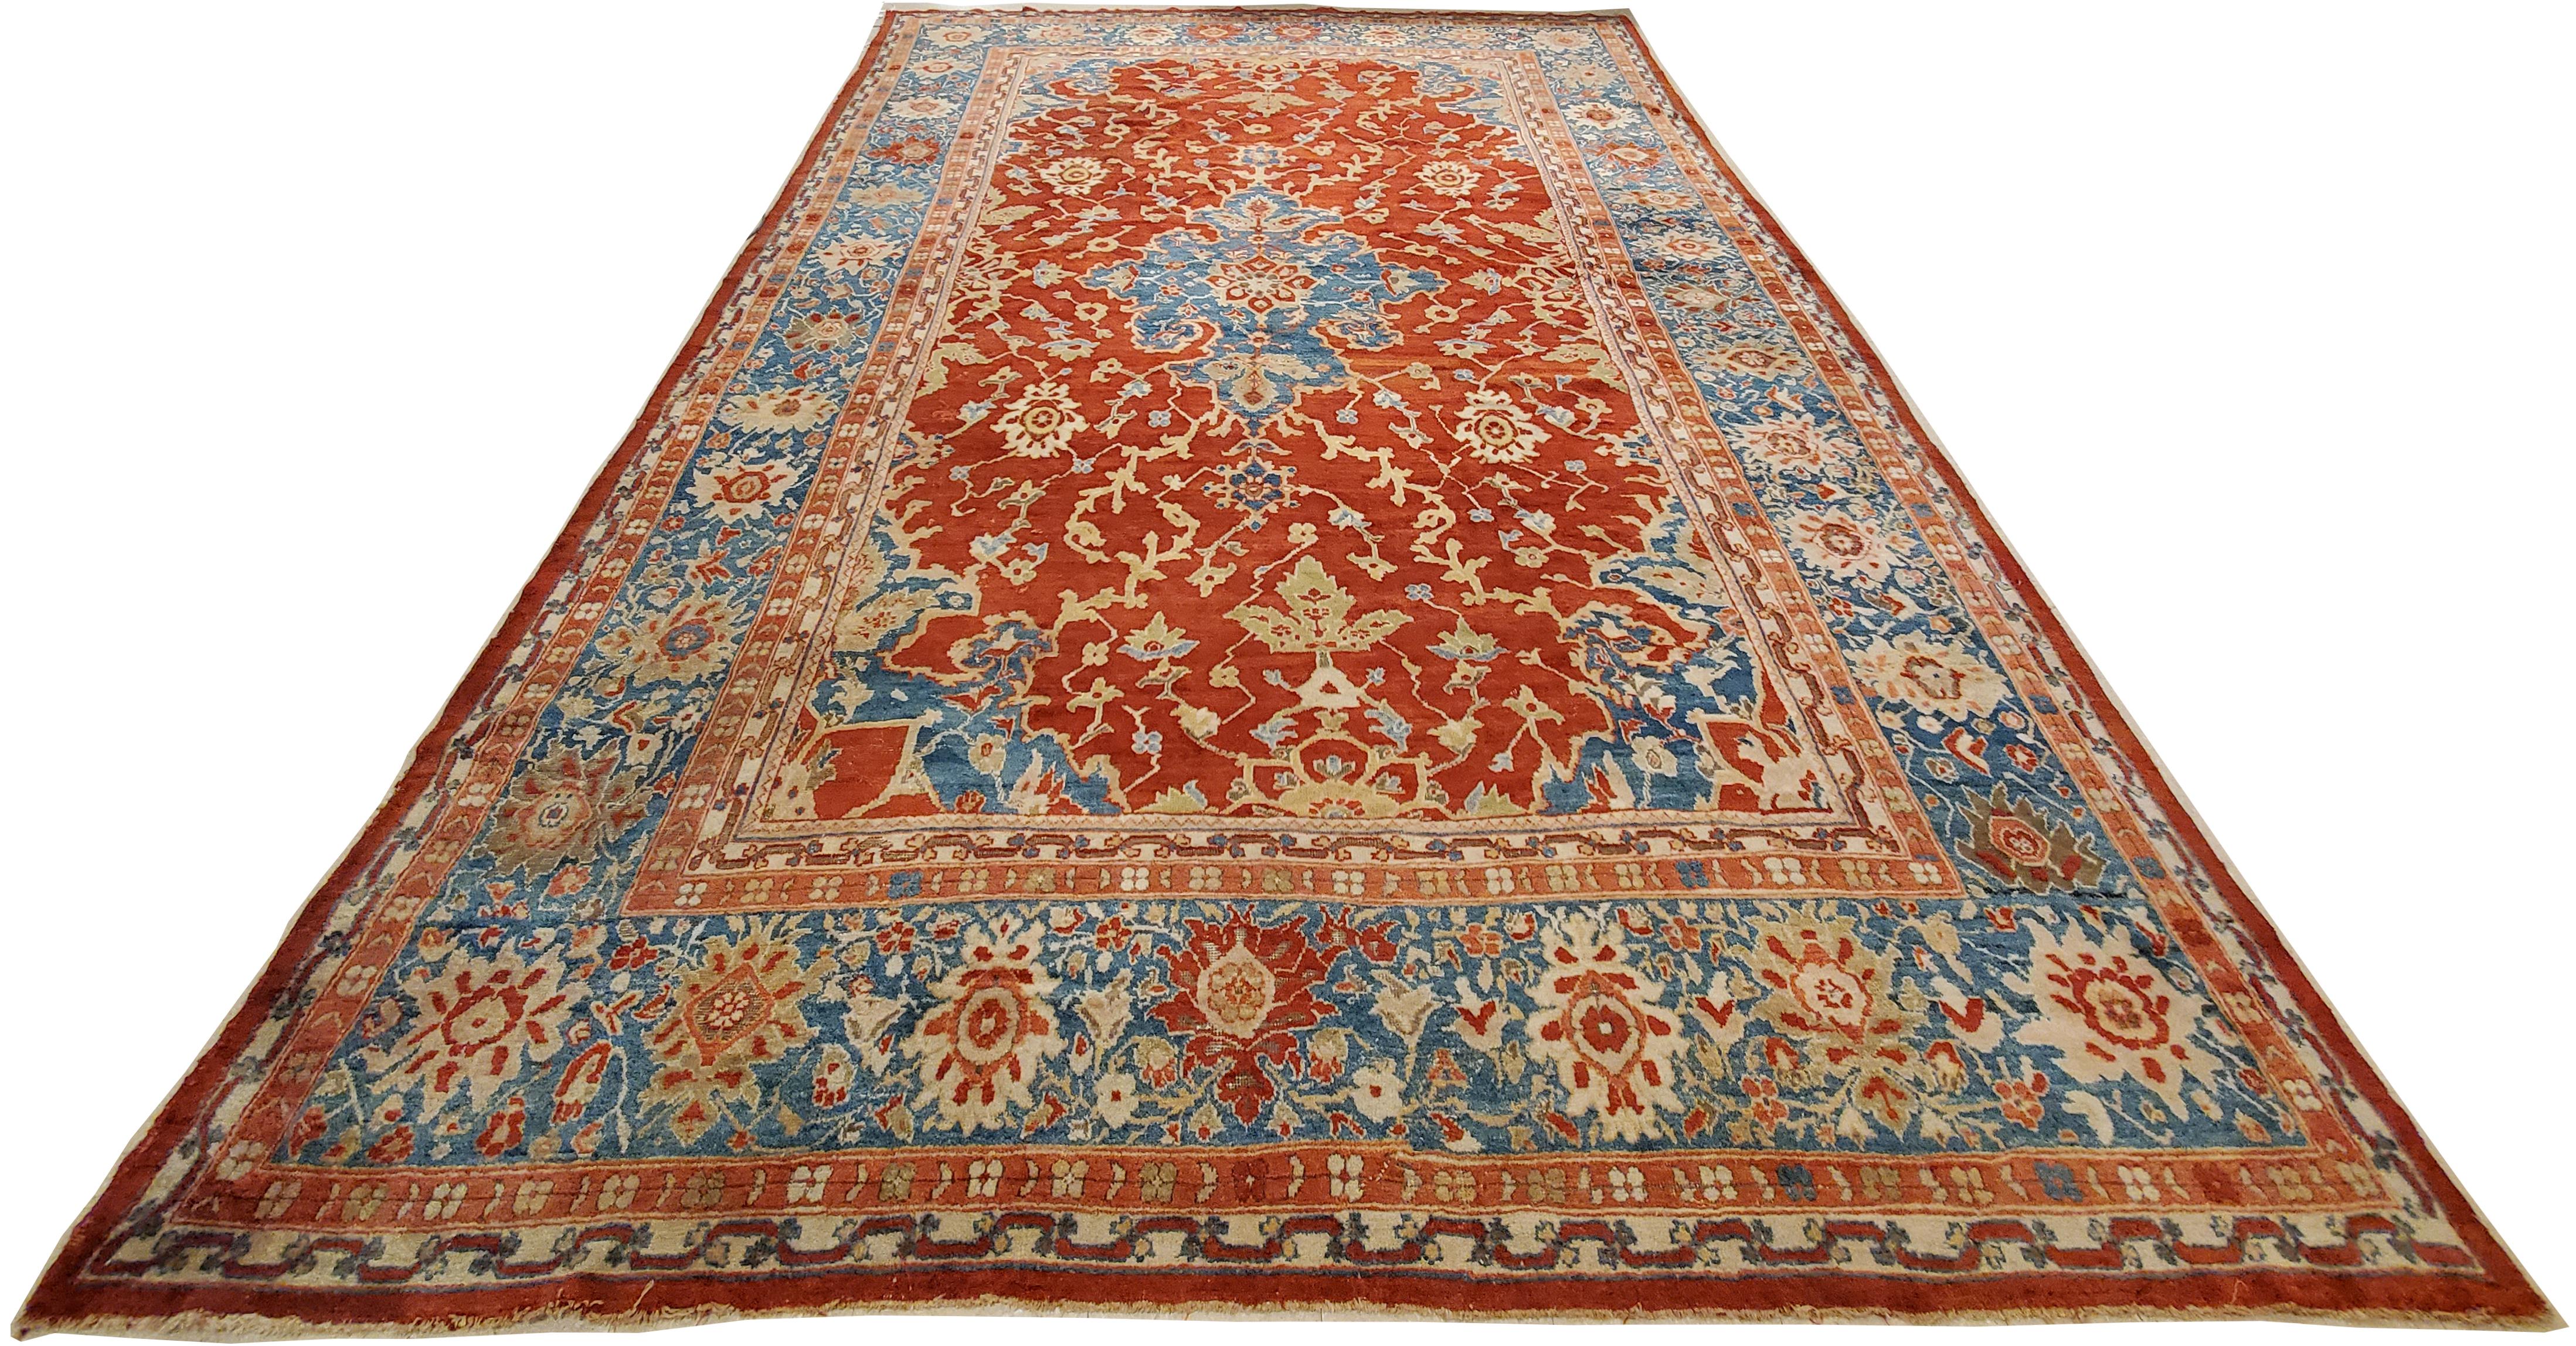 19th Century Antique Persian Sultanabad Carpet, Handmade Oriental Rug, Red, Light Blue & Gold For Sale